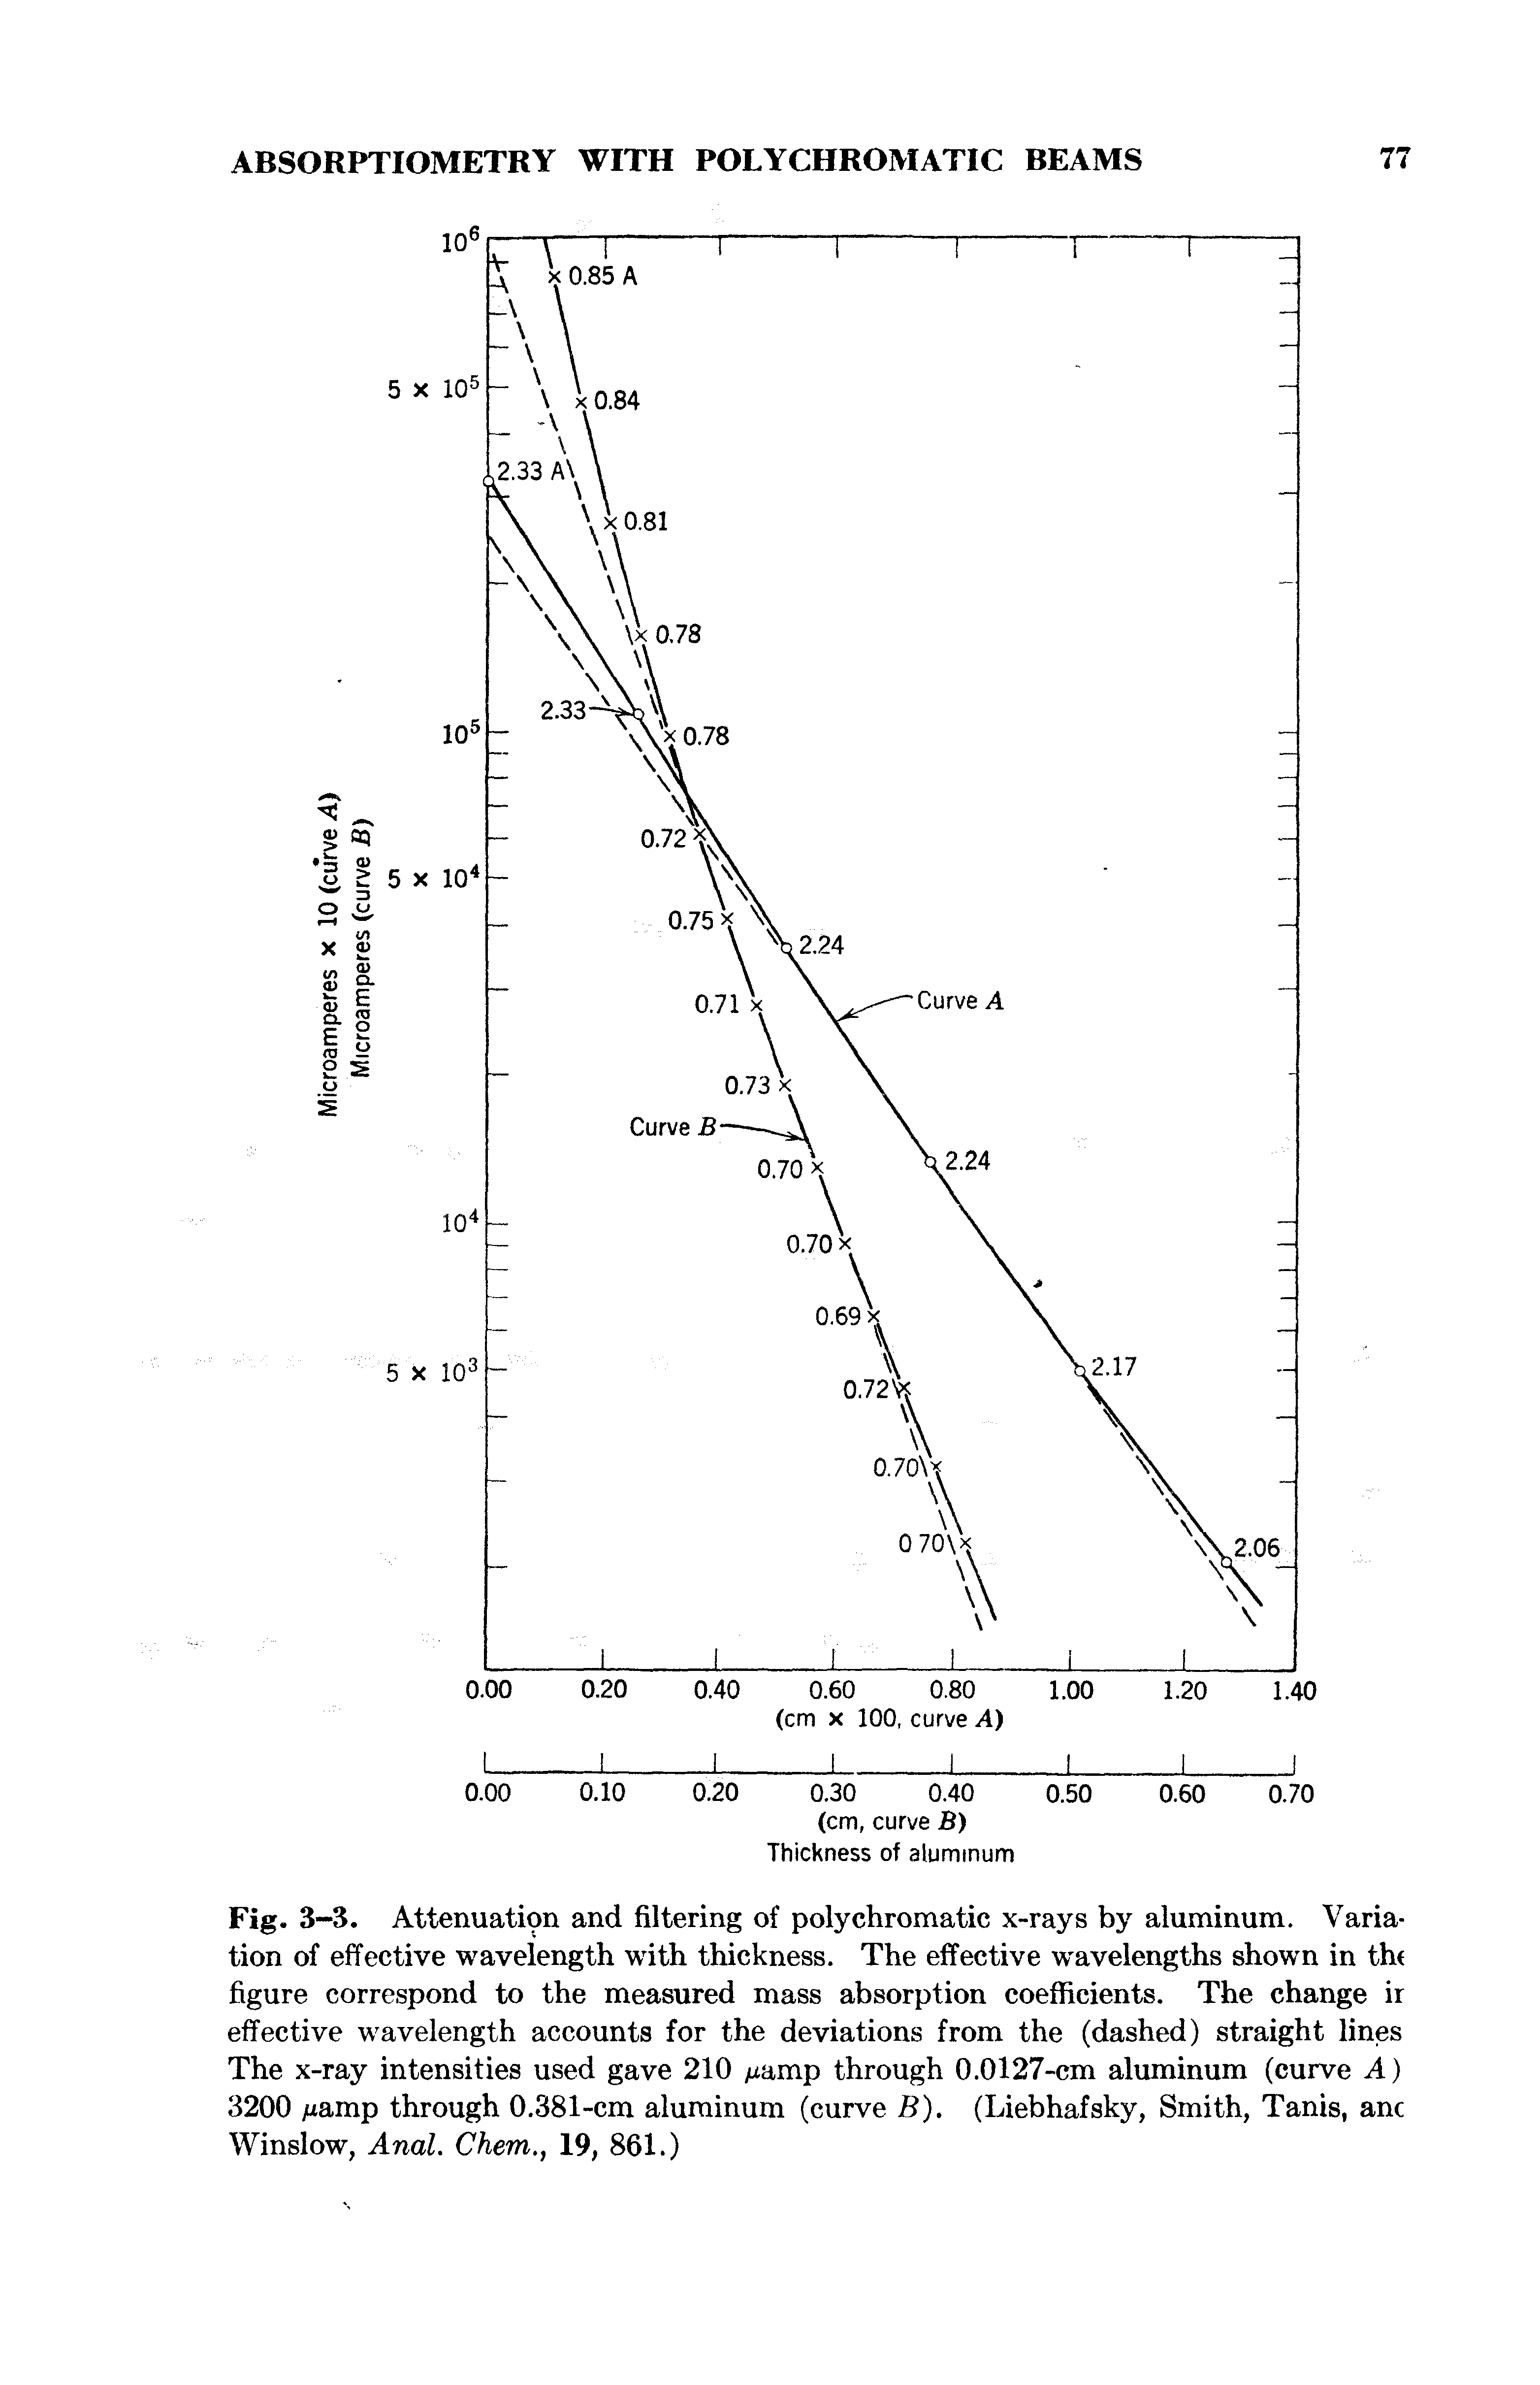 Fig. 3-3. Attenuation and filtering of polychromatic x-rays by aluminum. Variation of effective wavelength with thickness. The effective wavelengths shown in tin figure correspond to the measured mass absorption coefficients. The change ir effective wavelength accounts for the deviations from the (dashed) straight lines The x-ray intensities used gave 210 /xamp through 0.0127-cm aluminum (curve A) 3200 /xamp through 0.381-cm aluminum (curve B). (Liebhafsky, Smith, Tanis, anc Winslow, Anal. Chem., 19, 861.)...